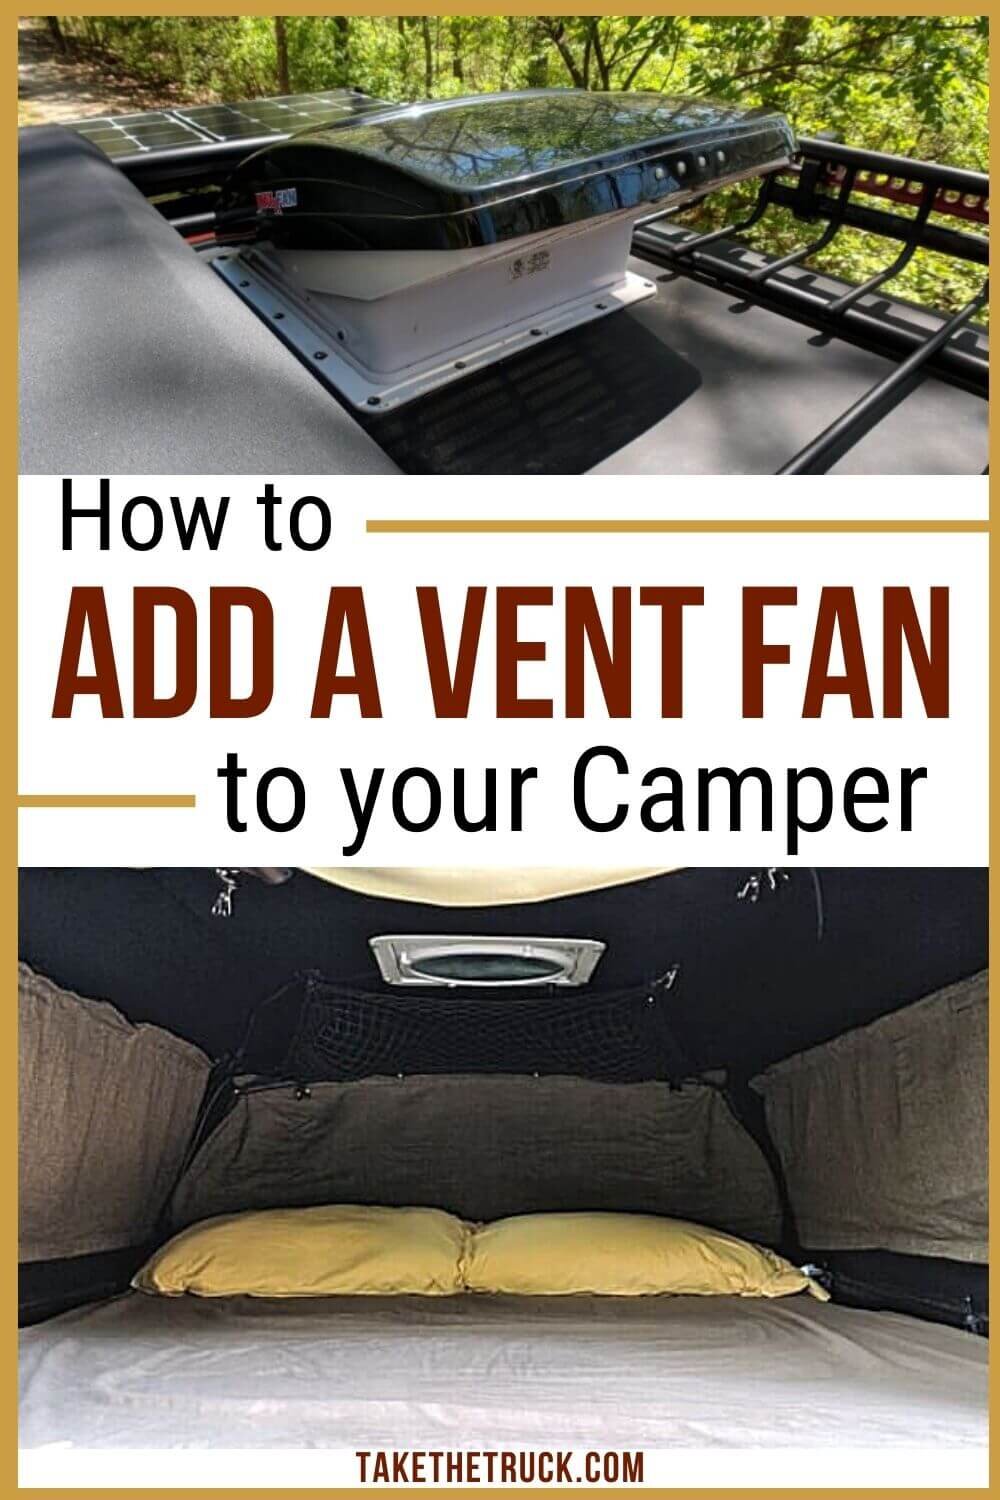 This post gives step-by-step directions on installing a Maxxair Fan in a truck camper roof. A camper van or truck bed camper vent fan can make summer truck camping more comfortable!